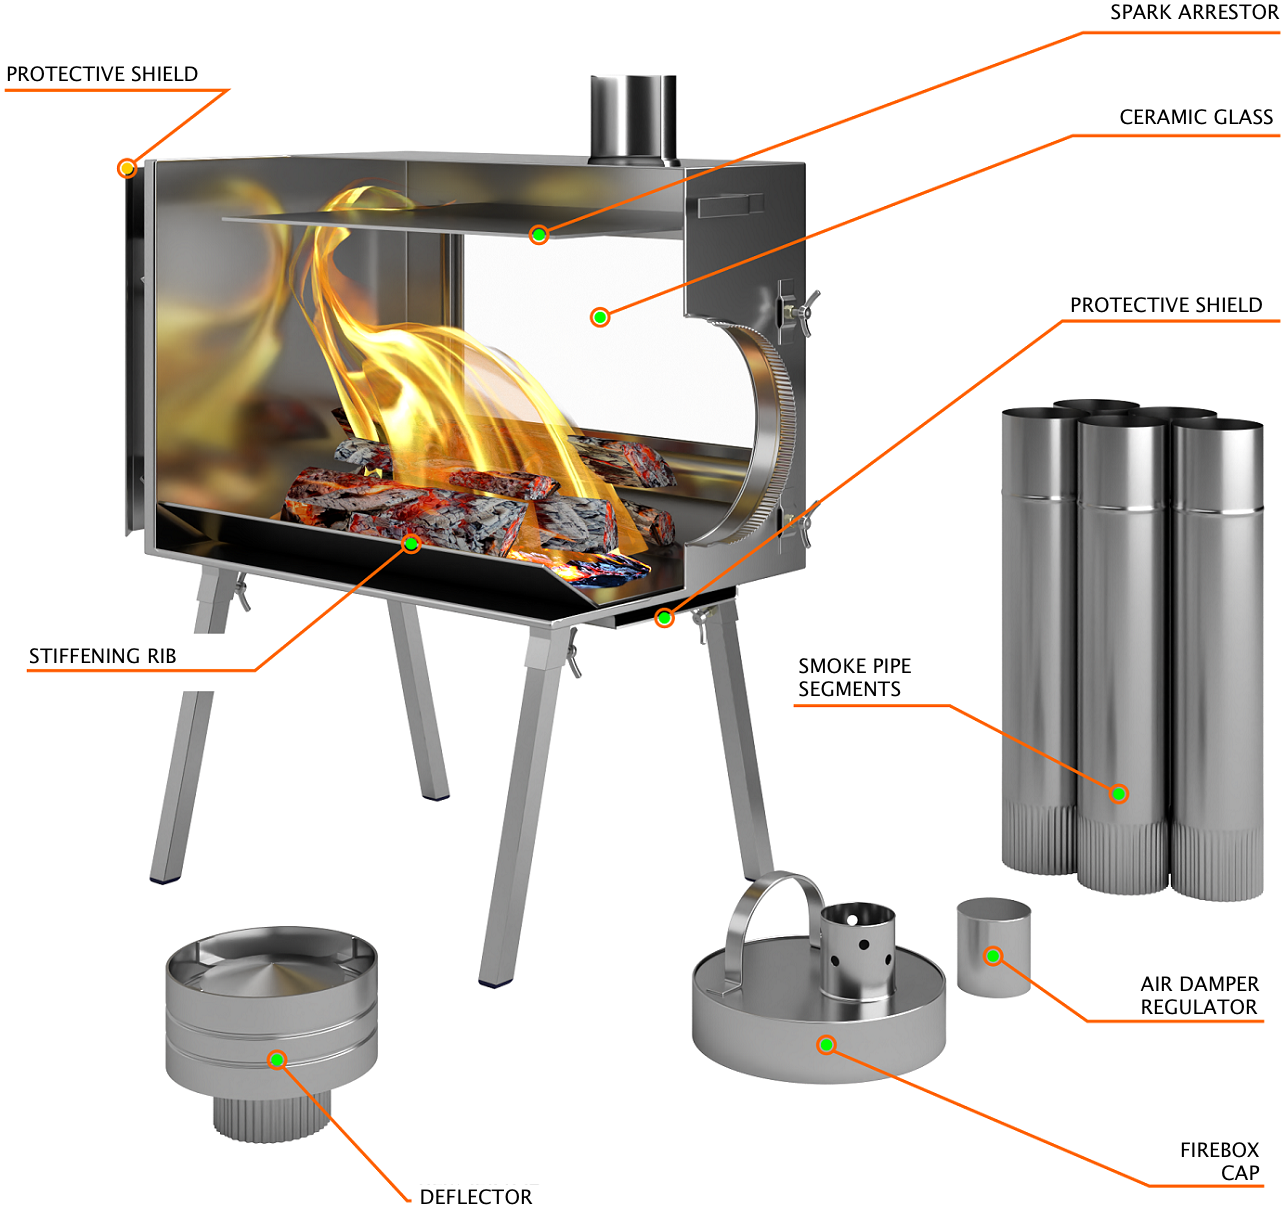 Large Wood Stove With Fire-Resistant Glass